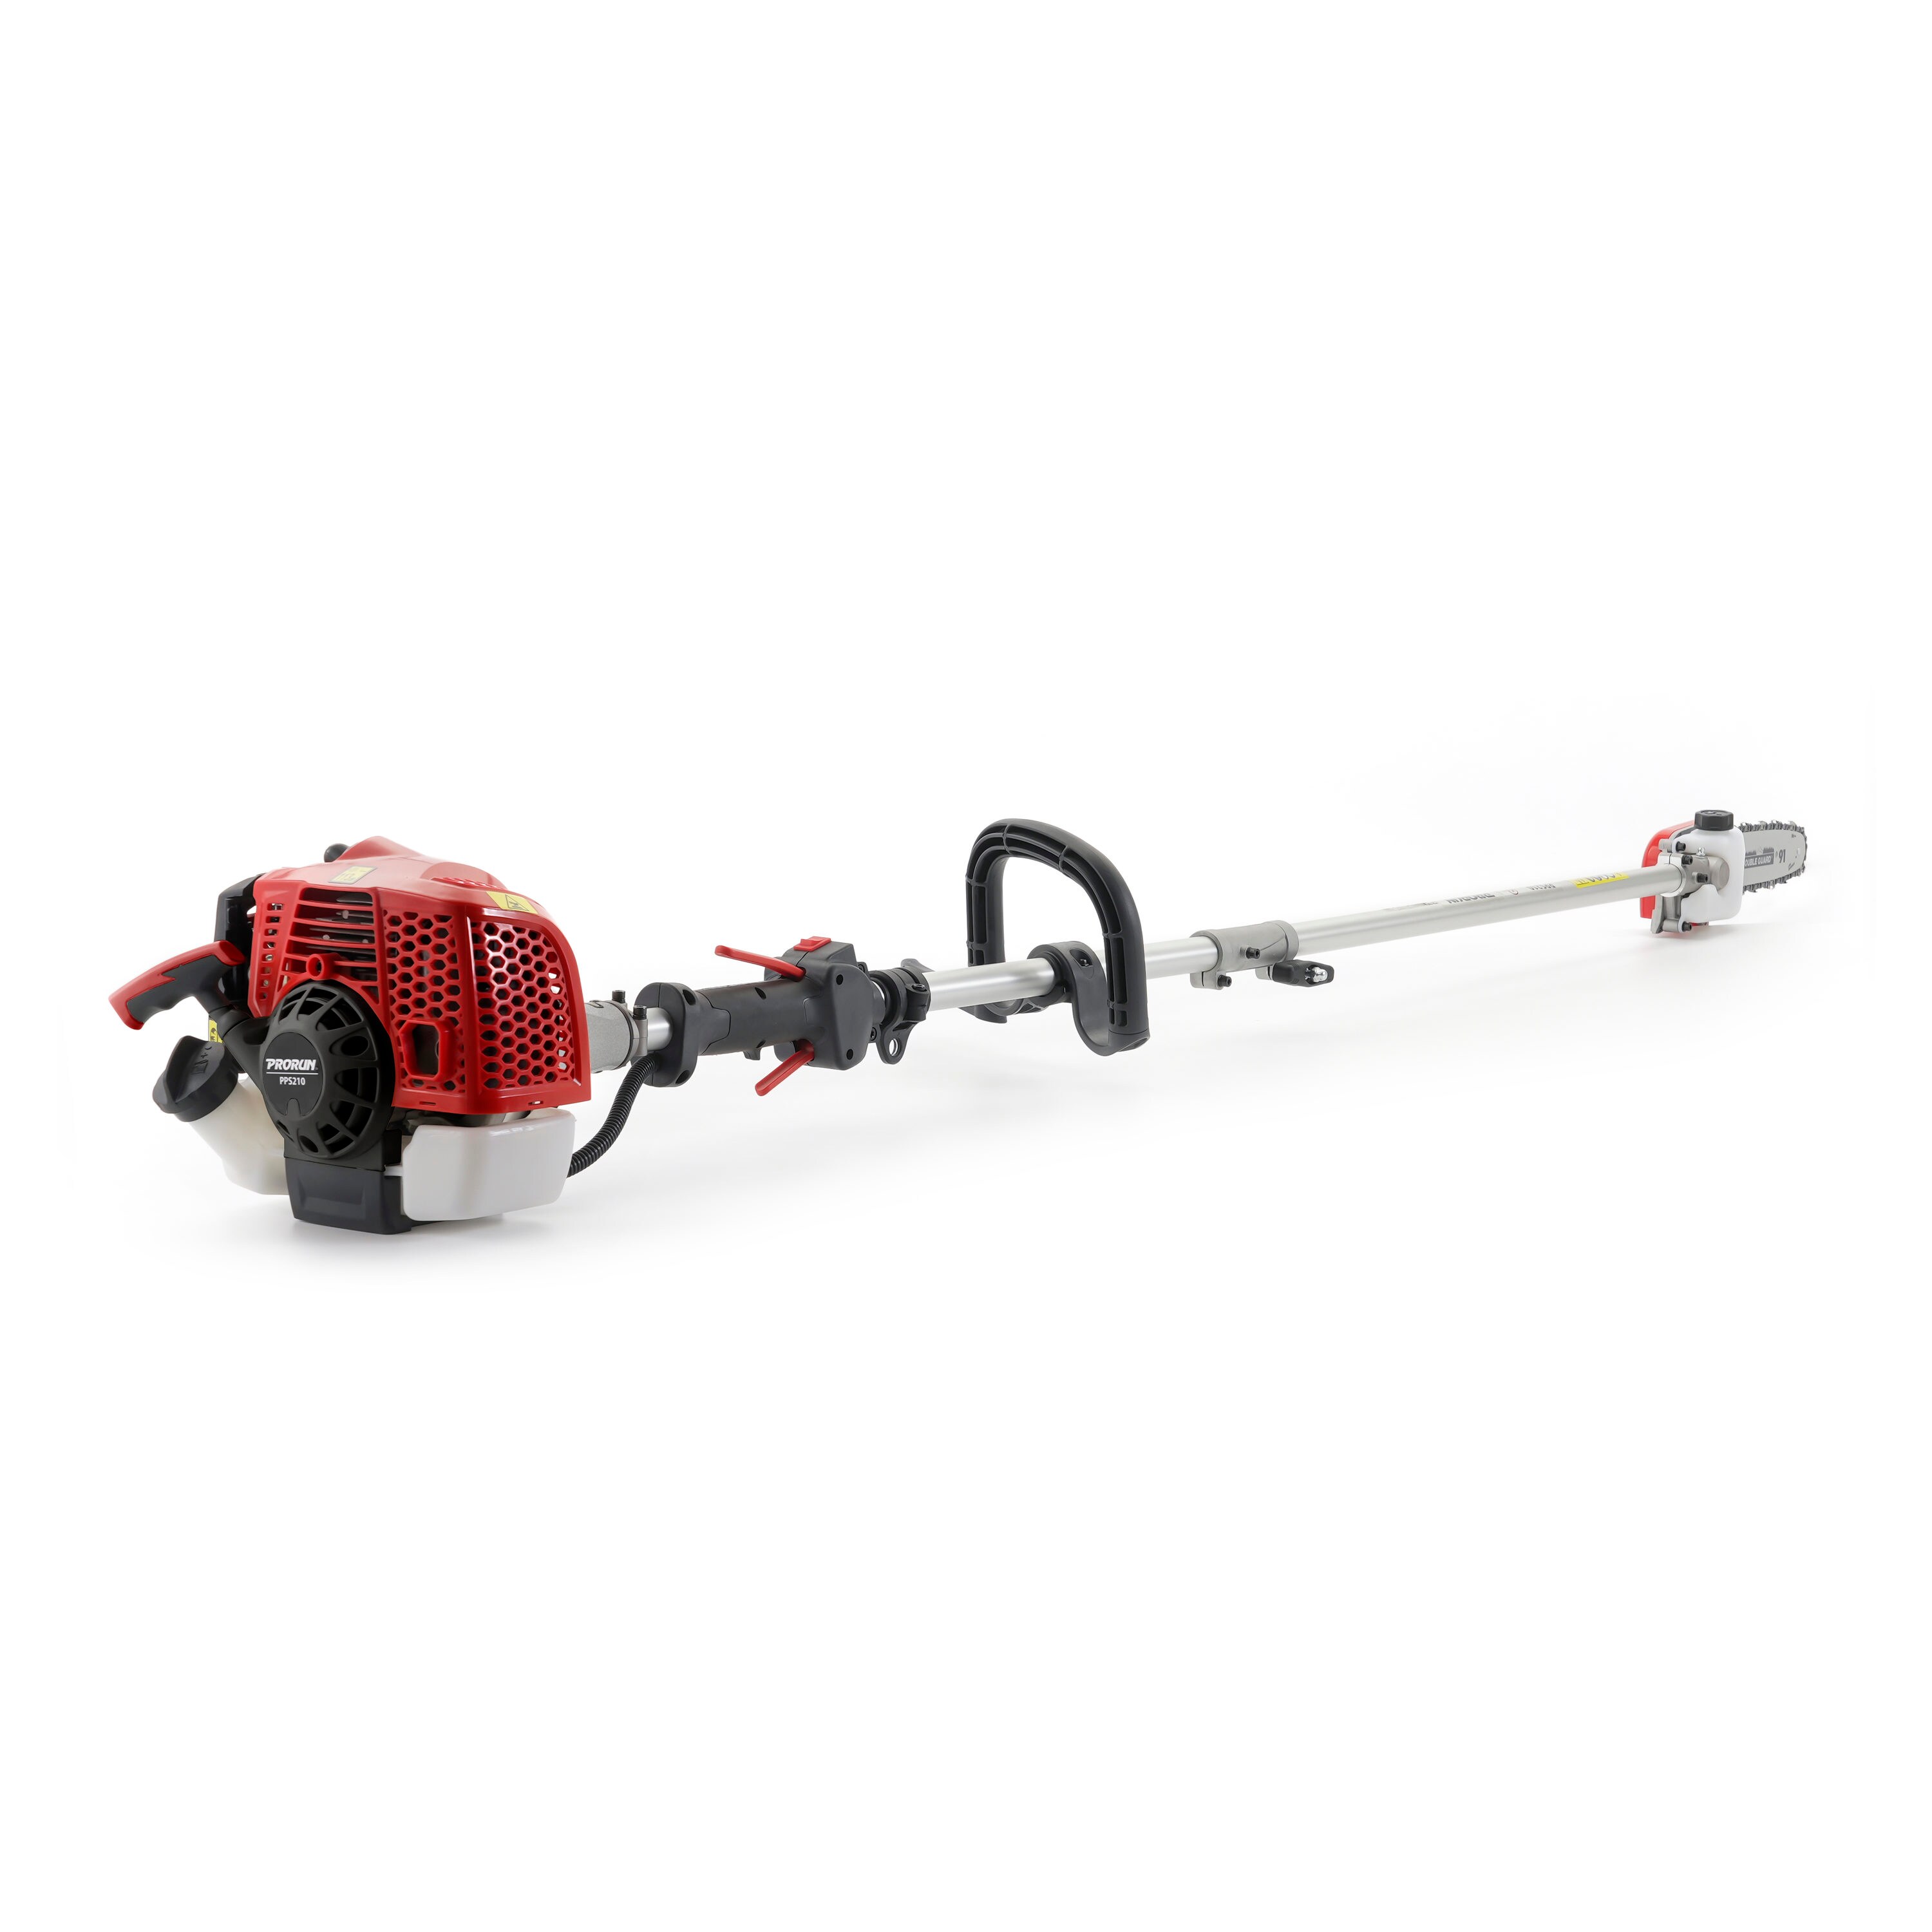 Details about   59" 4-Stroke Gasoline Pole Chain Saw Pruner 37CC Tree Brush Cutter Trimmer 37cc 